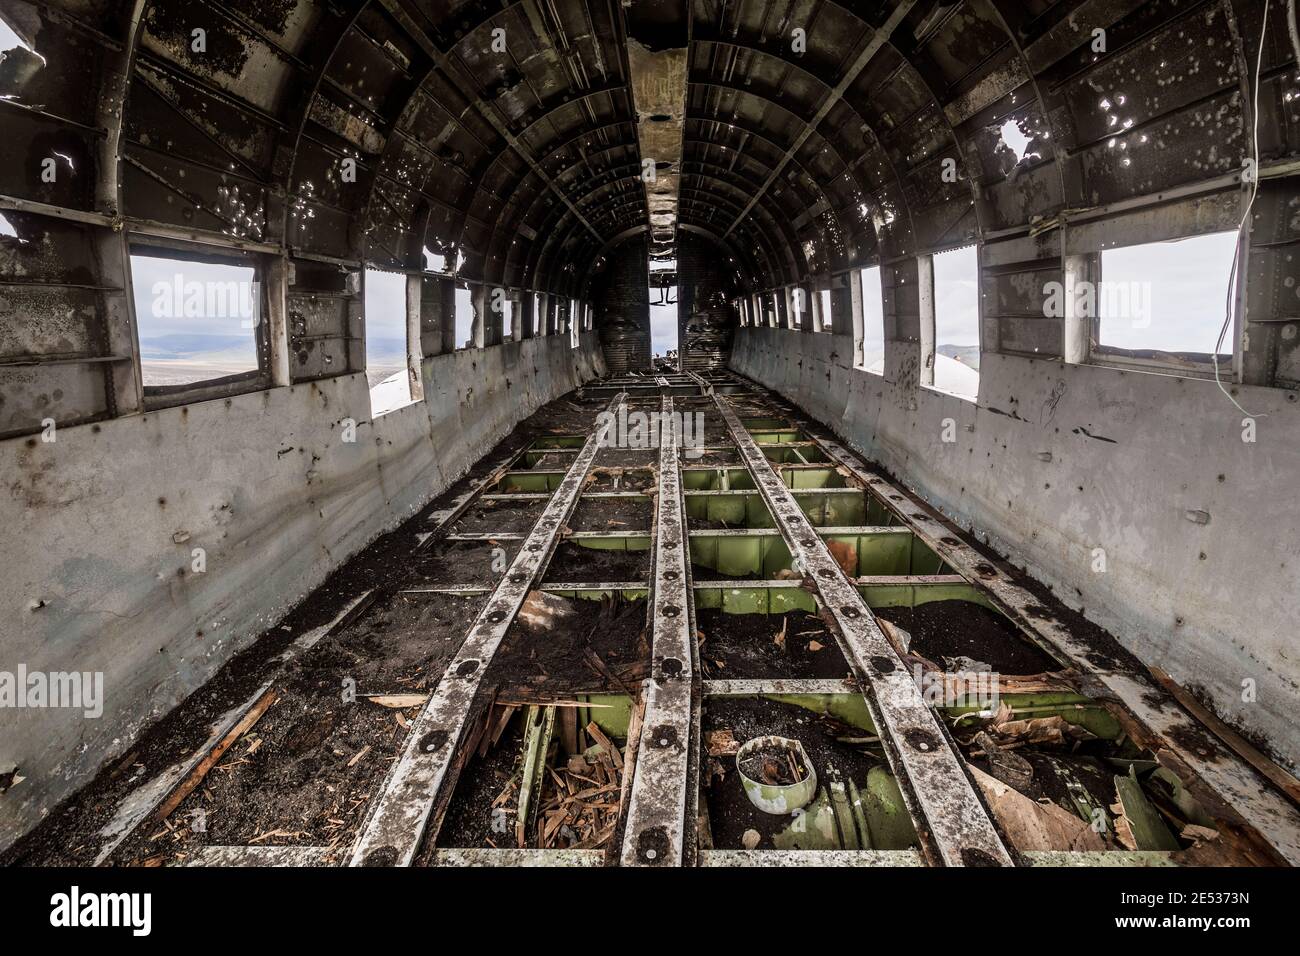 nterior of the fuselage of the wreck of an old, abandoned plane Stock Photo